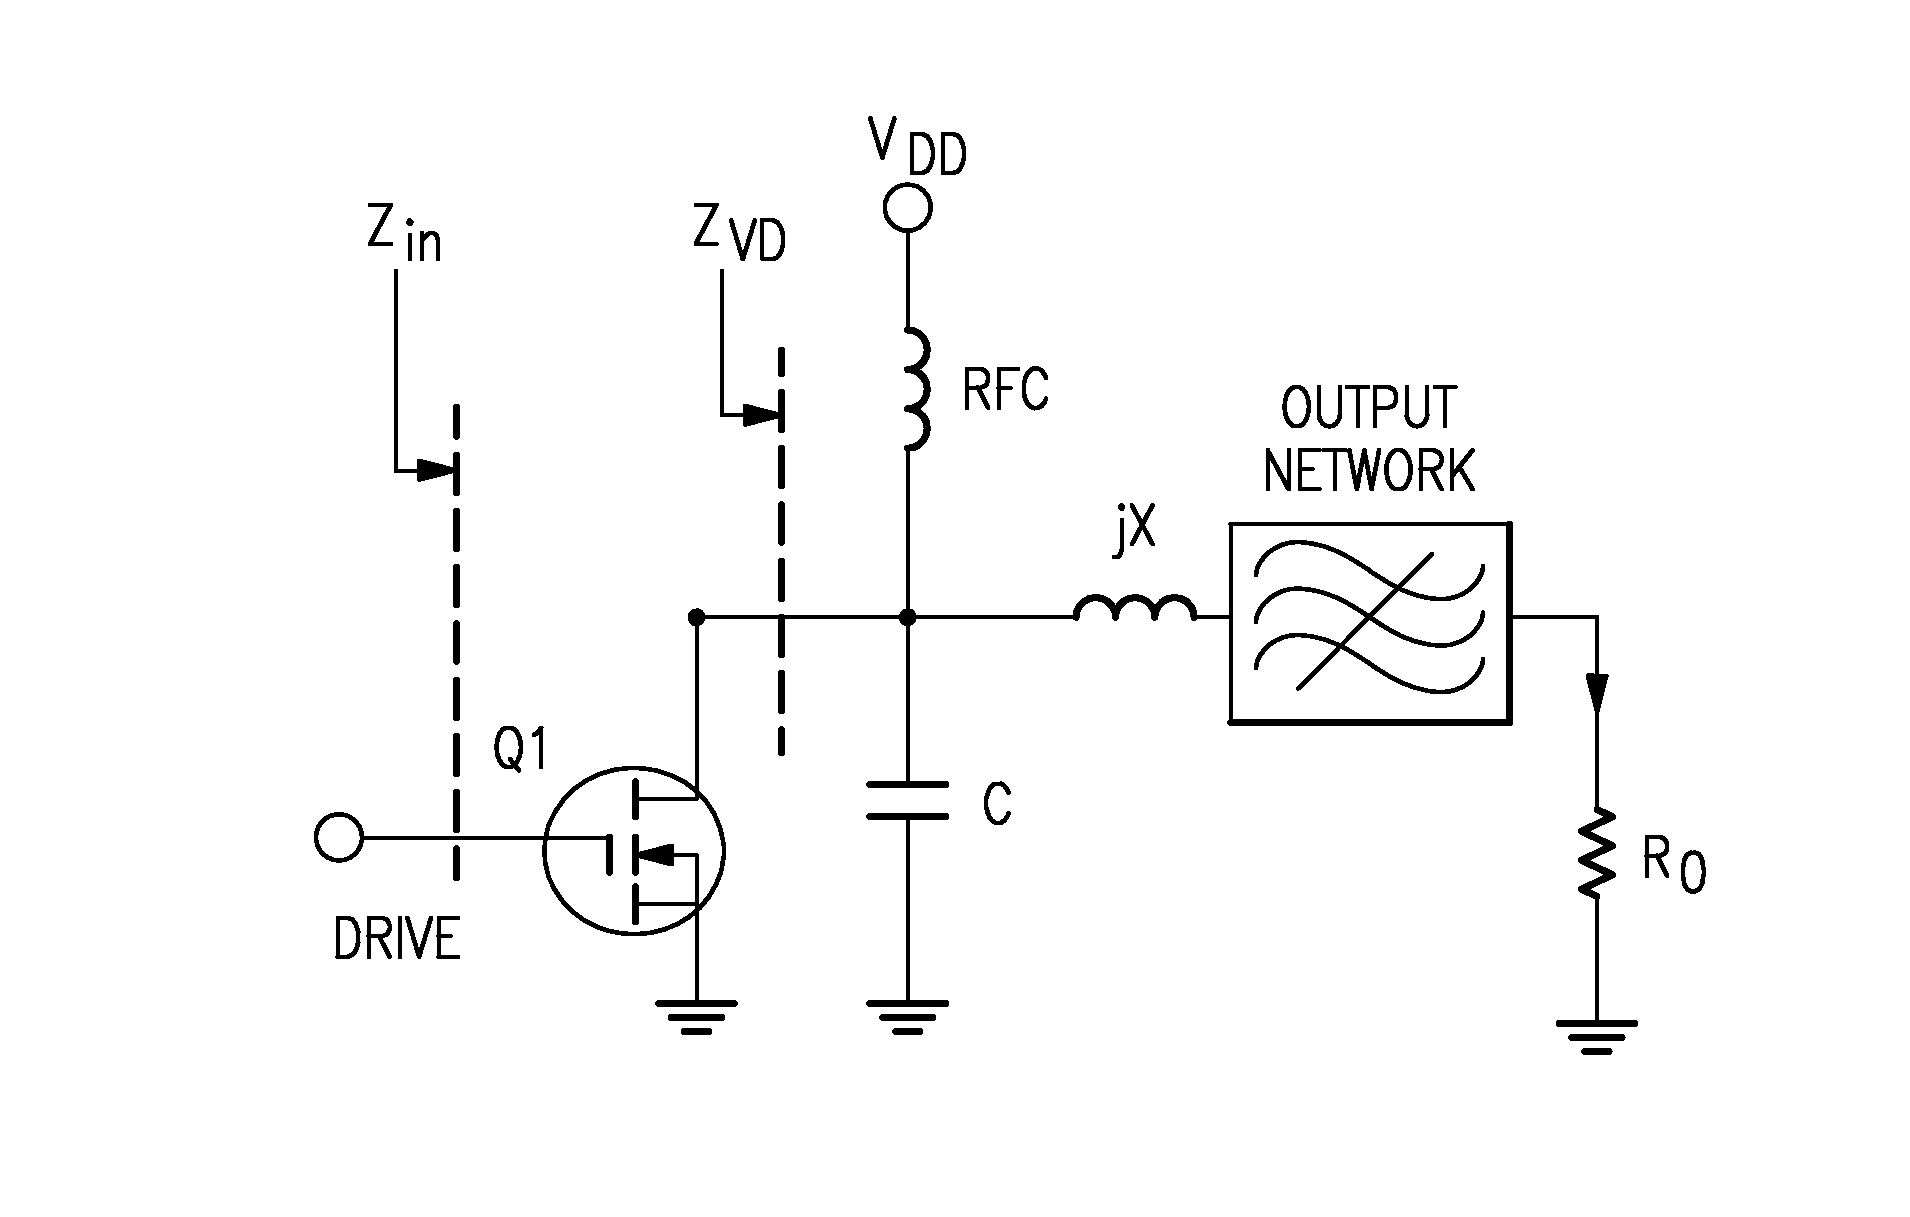 Circuits and methods related to power amplifier efficiency based on multi-harmonic approximation